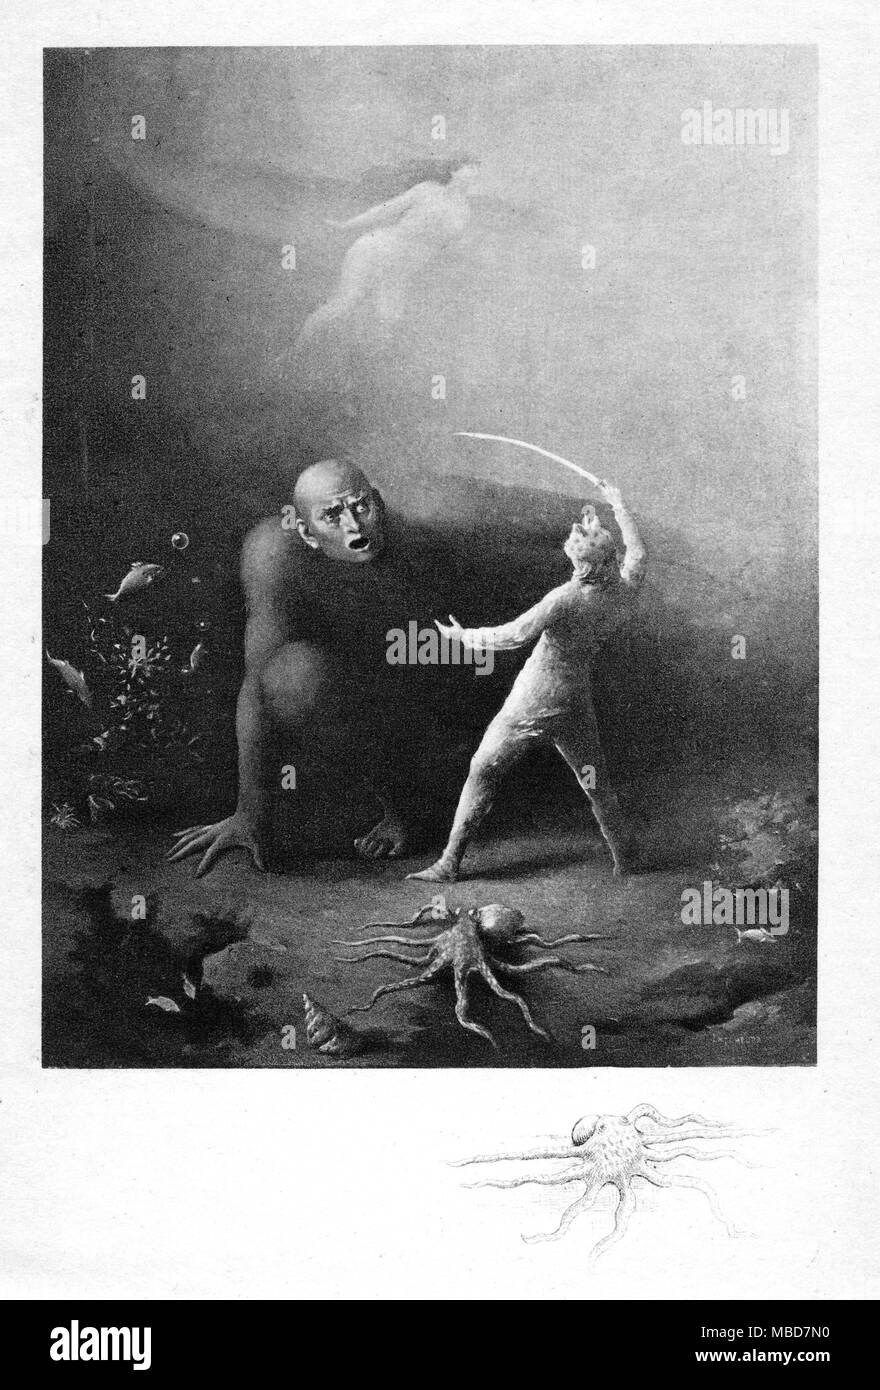 FAIRYTALES - GIANT GENII Confronting a giant genii, underwater. Loose leaf print, from the John Payne translation of the Arabic of The Book of the Thousand Nights and One Night, 1901 - probably an illustration of Abdallah the human 'lack-tail' fisherman, from the tale of Abdallah the Fisherman and Abdallah the Merman. Stock Photo